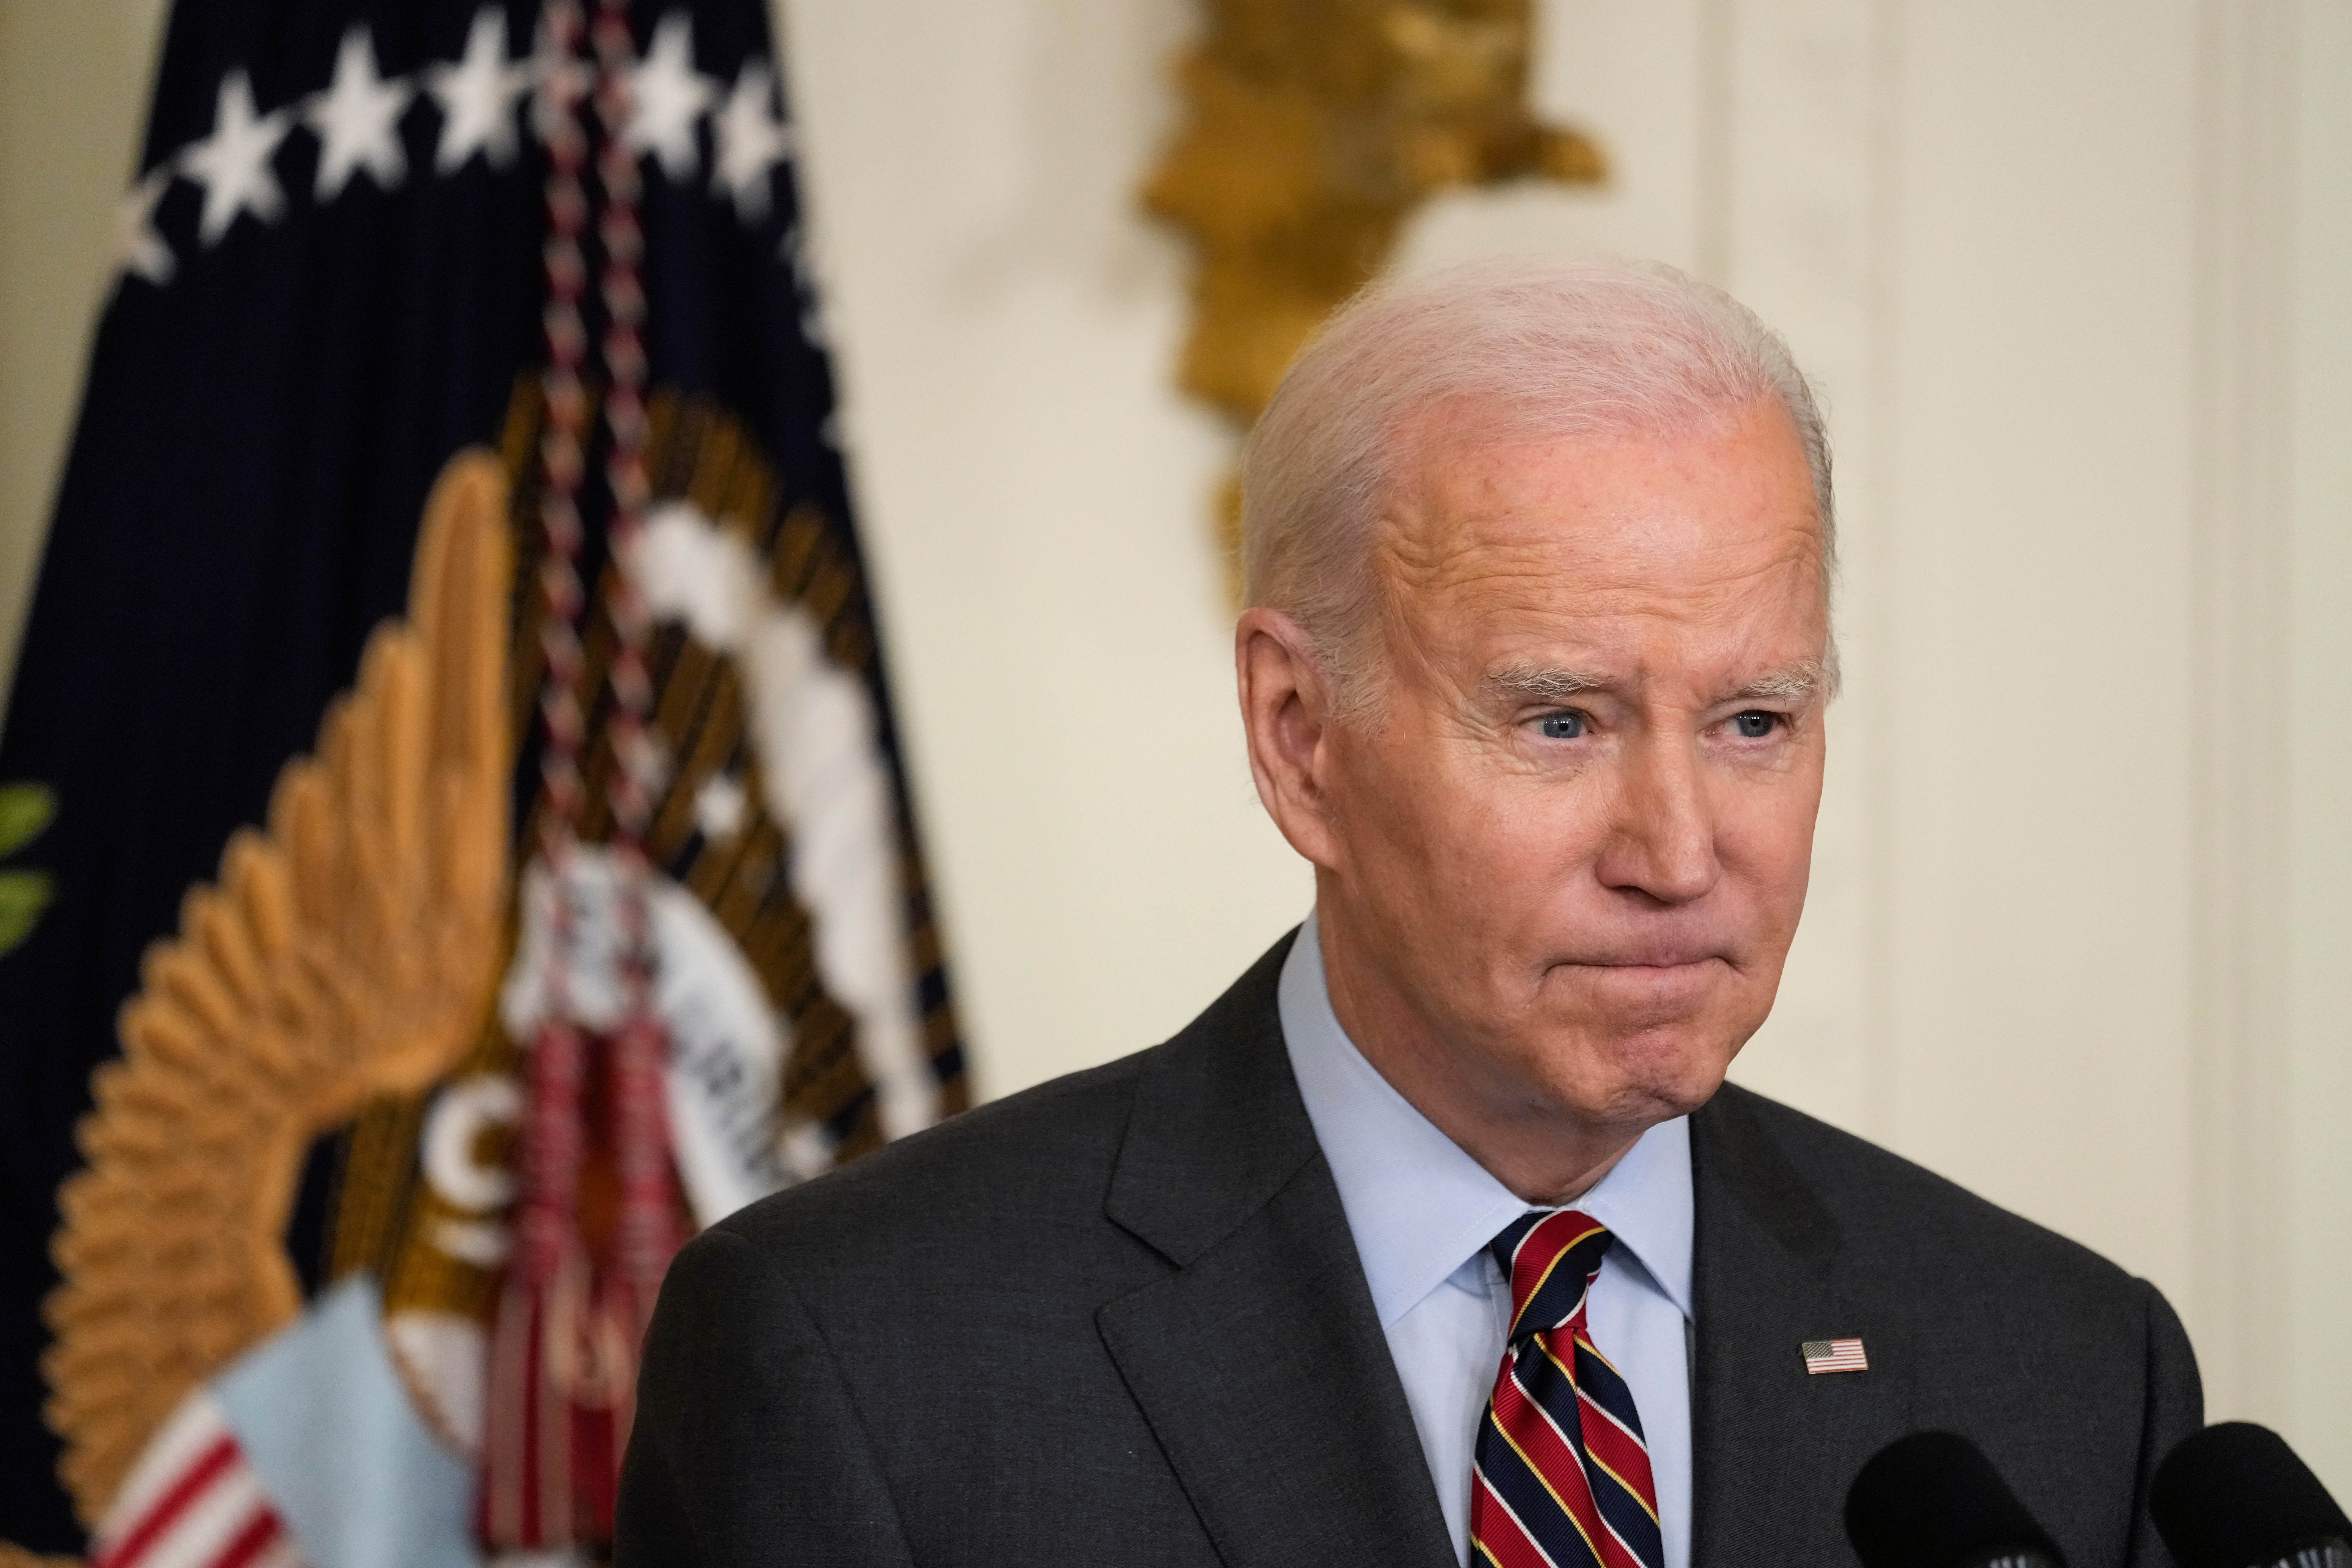 President Joe Biden, who has repeatedly urged lawmakers to renew a federal assault weapons ban, speaks from the White House about a school shooting in Nashville on 27 March.